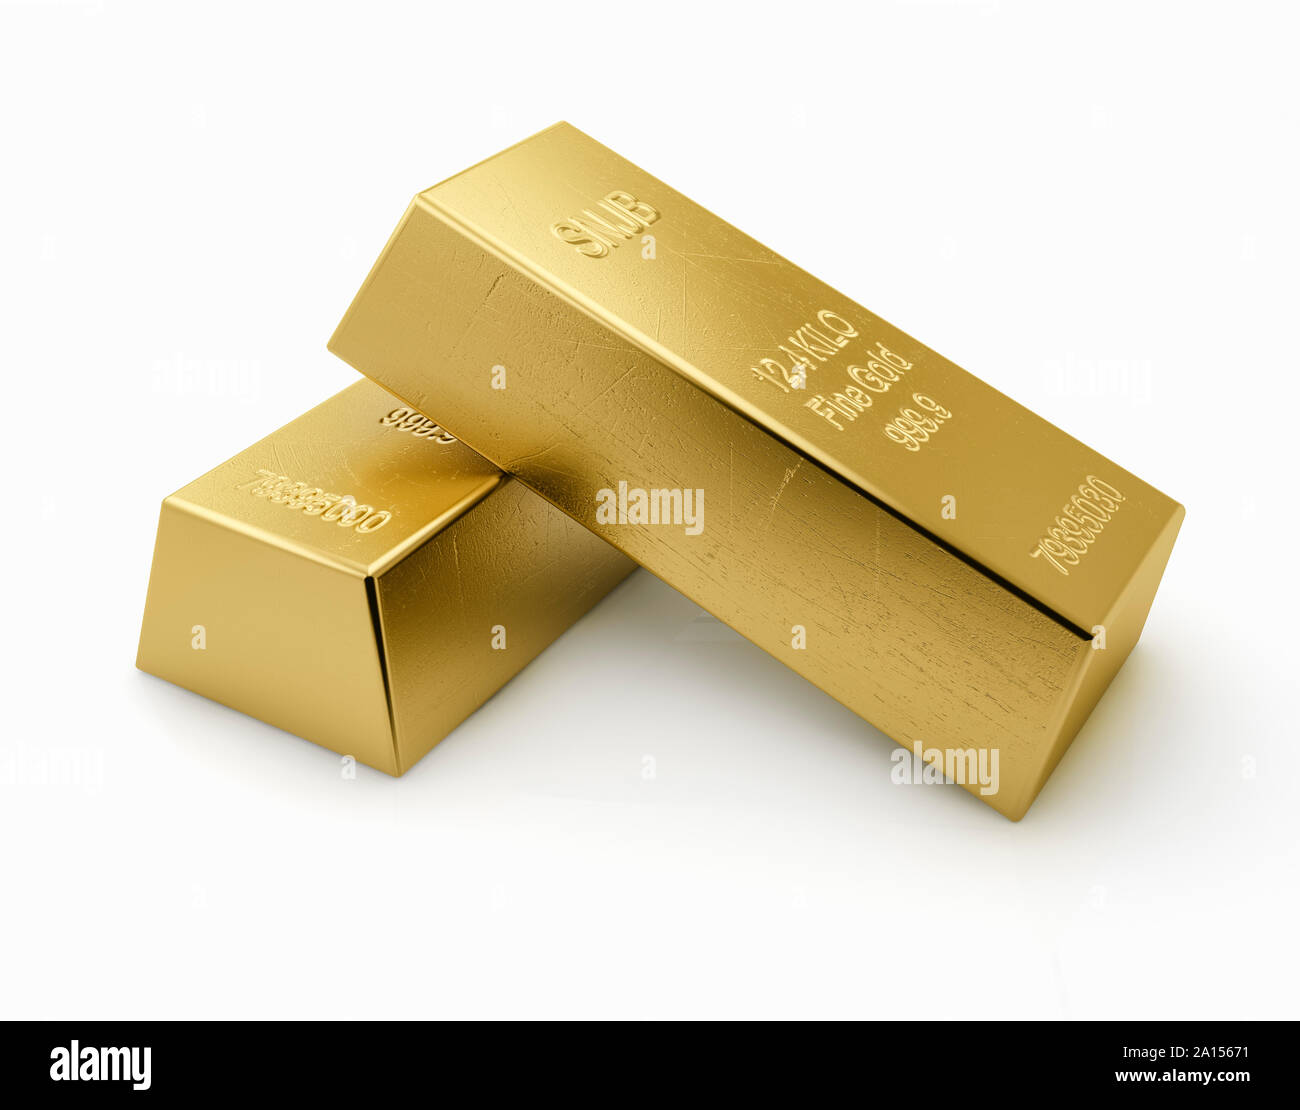 Two gold bars ingots on a white background Stock Photo